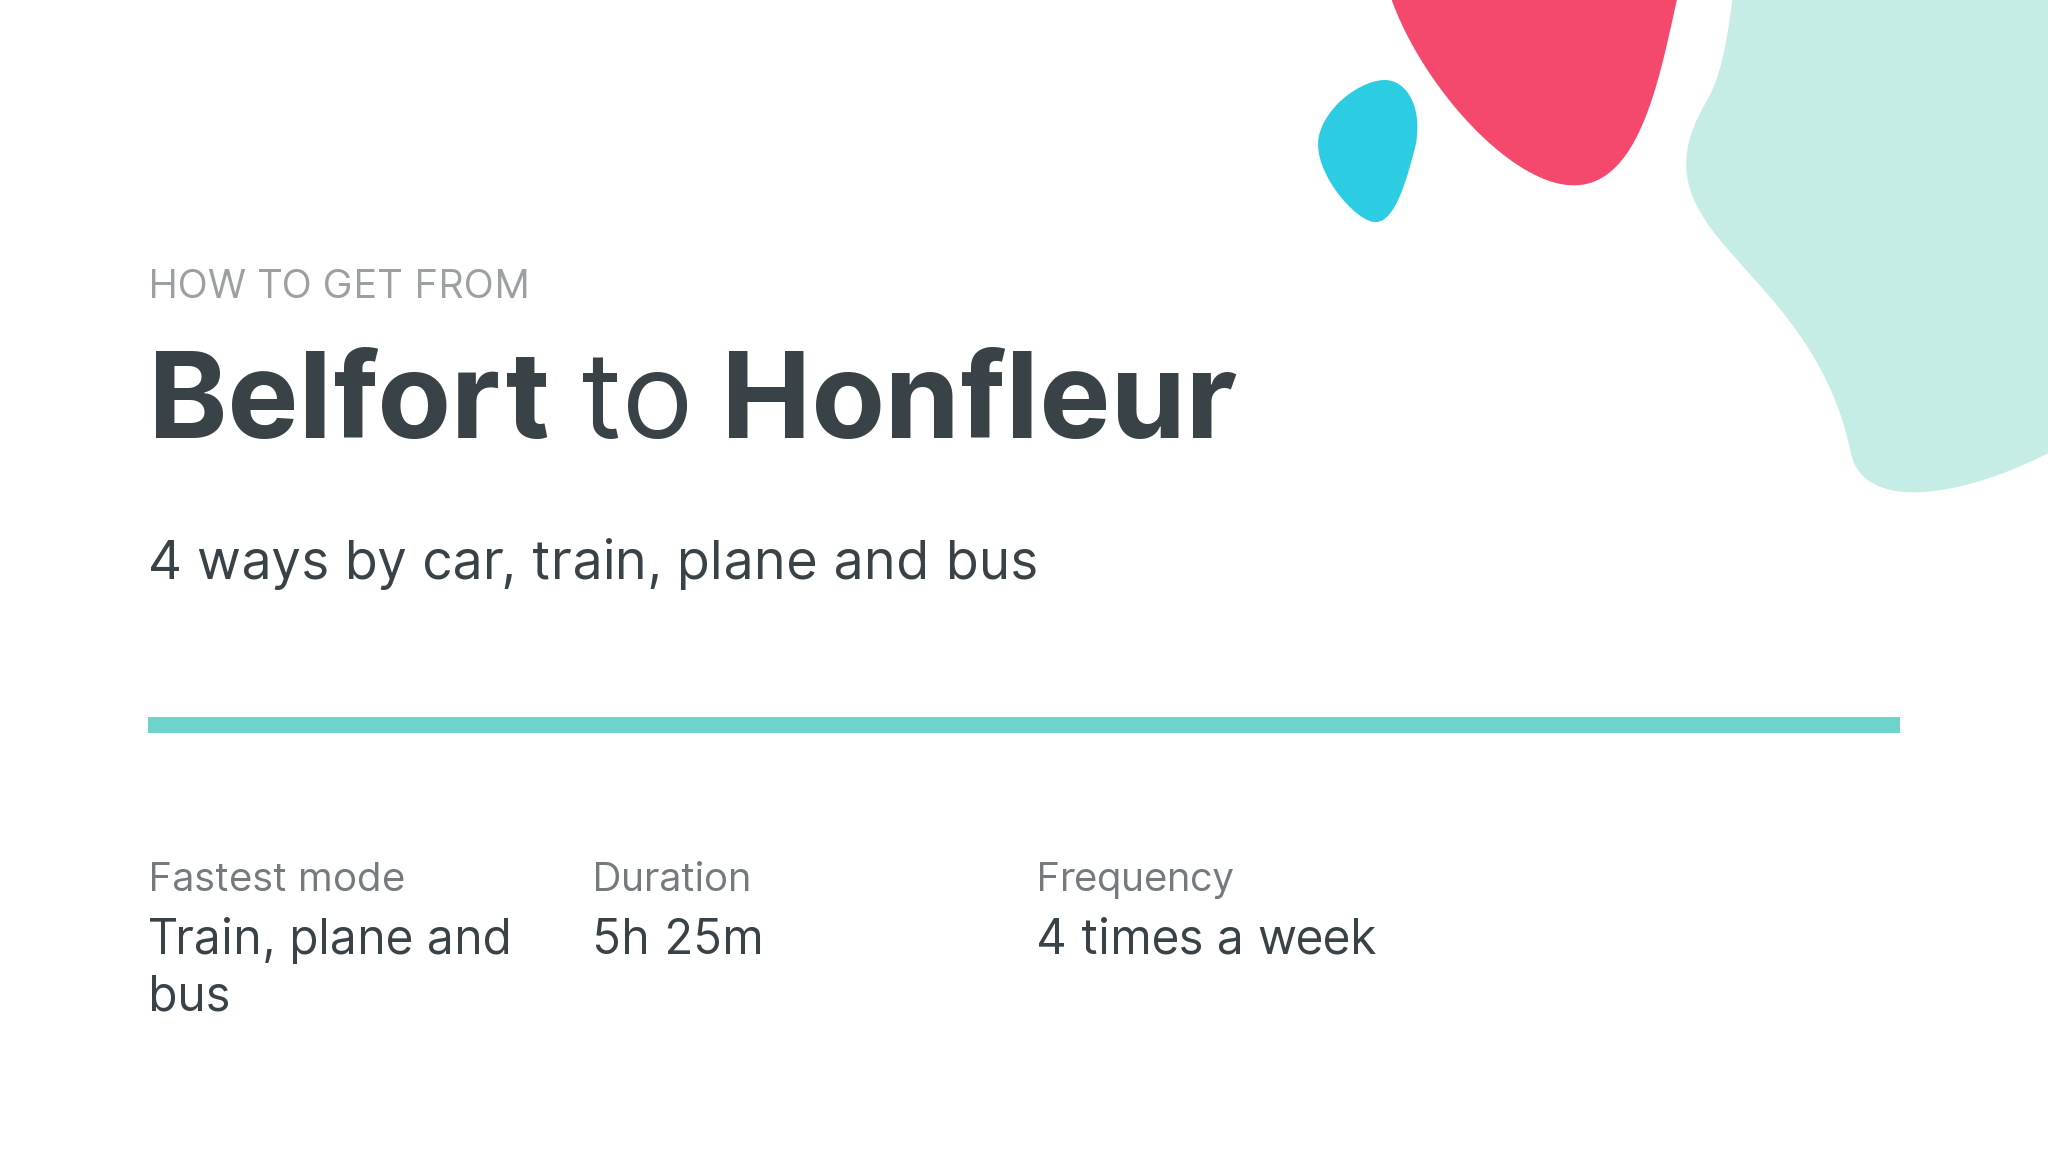 How do I get from Belfort to Honfleur